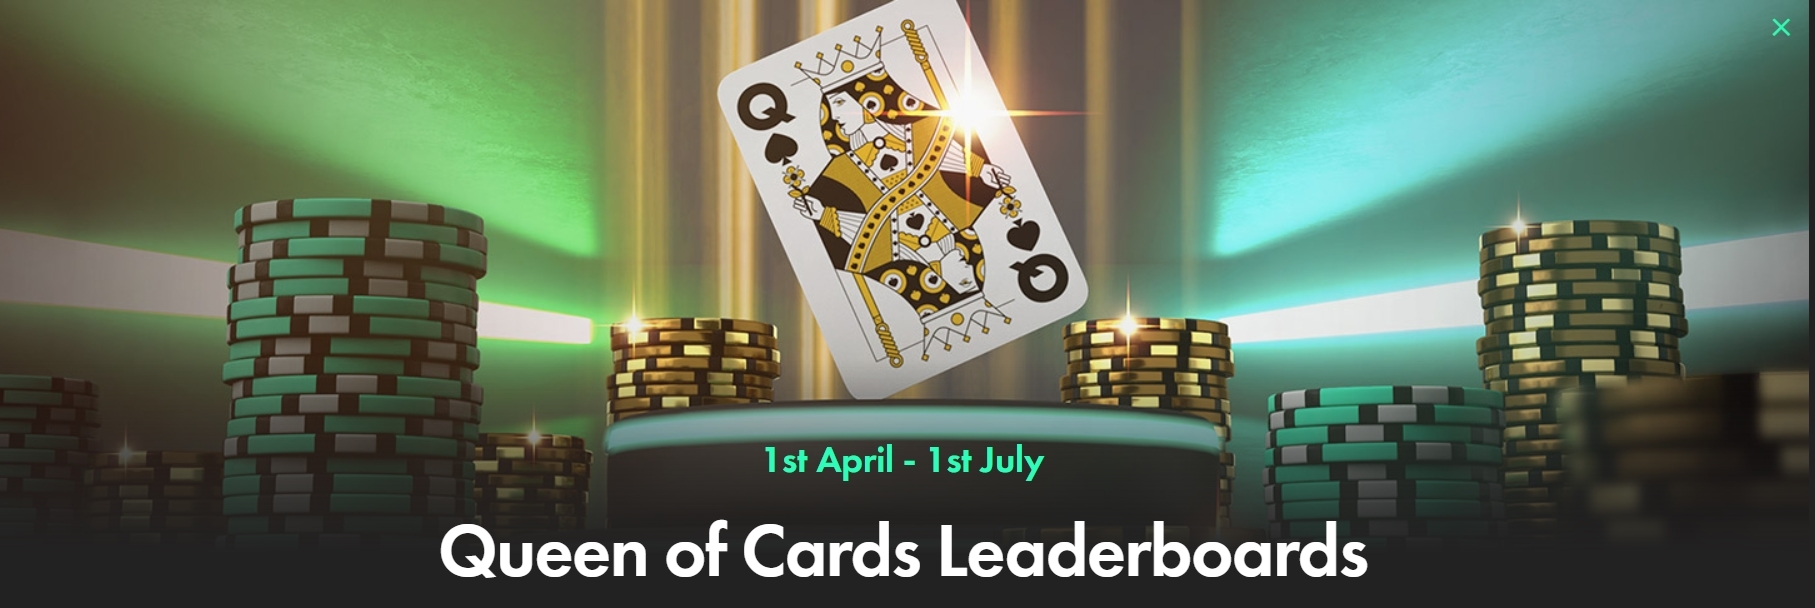 Another Weekly Poker Leaderboards